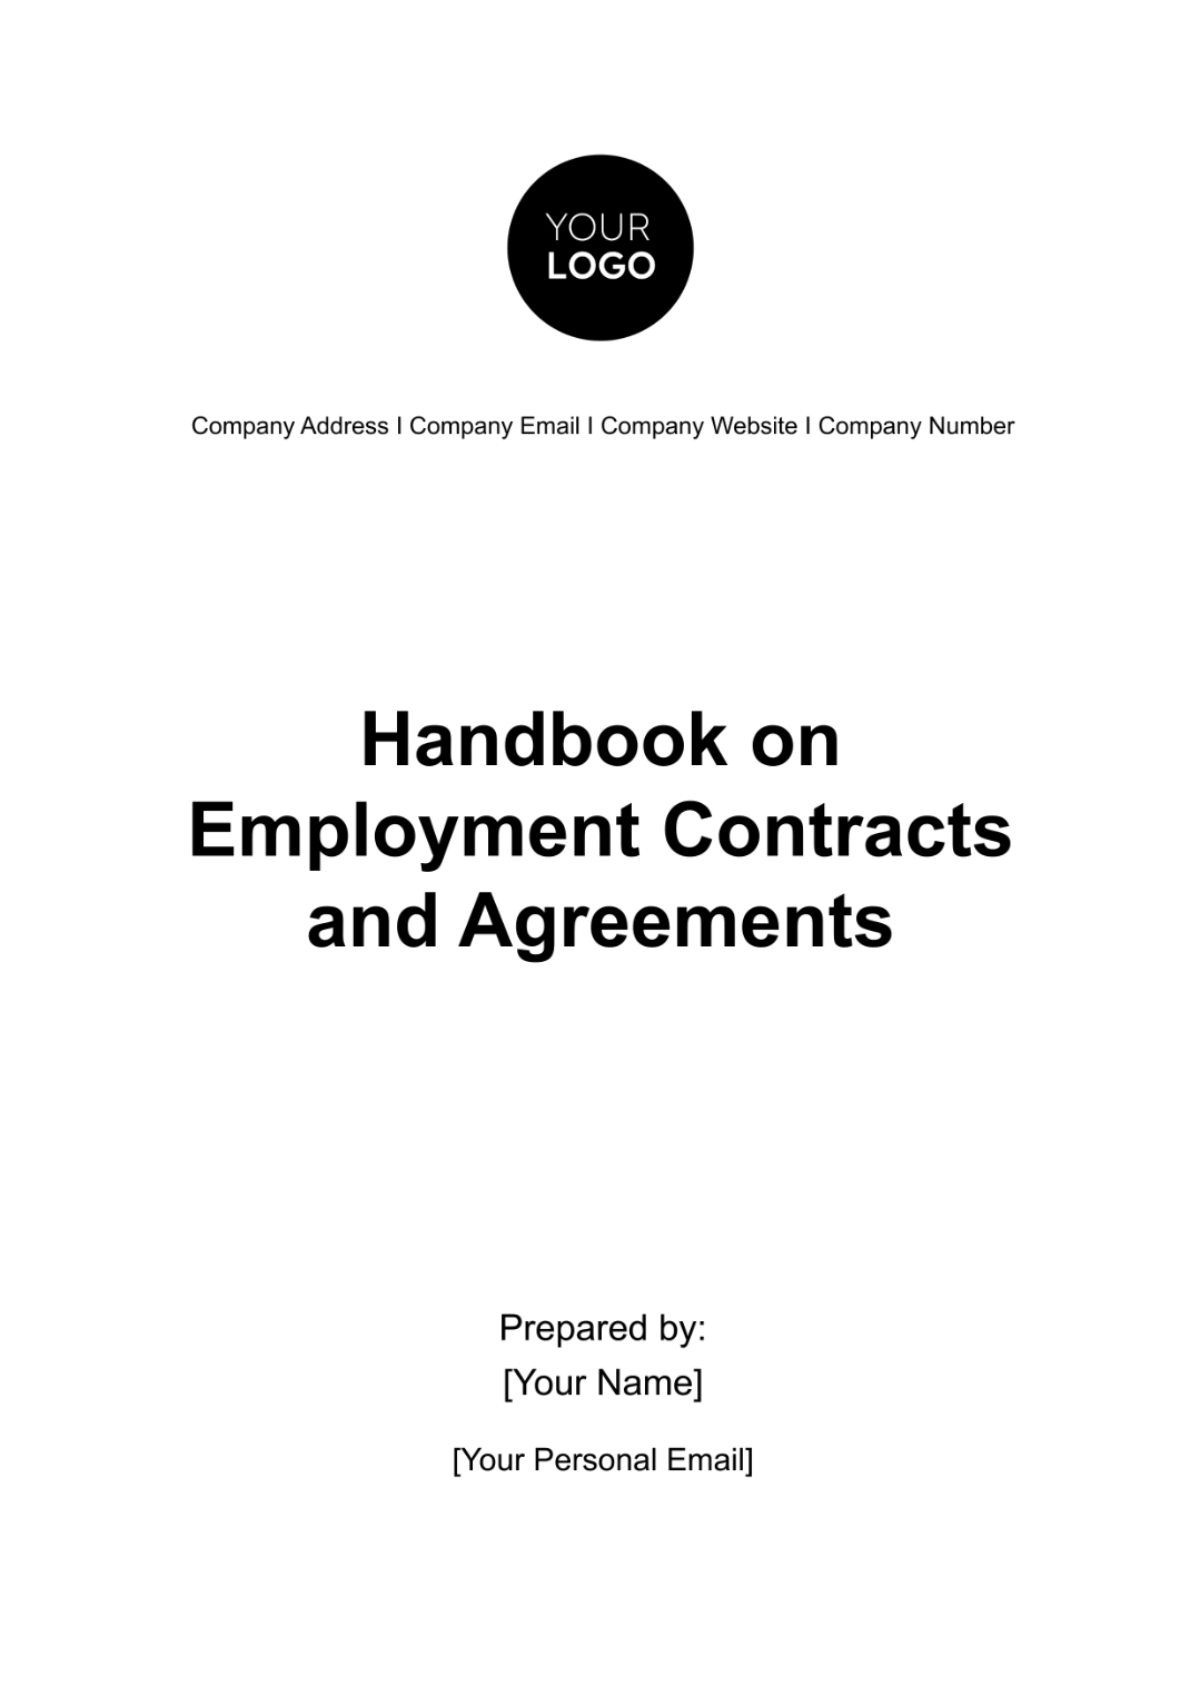 Free Handbook on Employment Contracts and Agreements HR Template